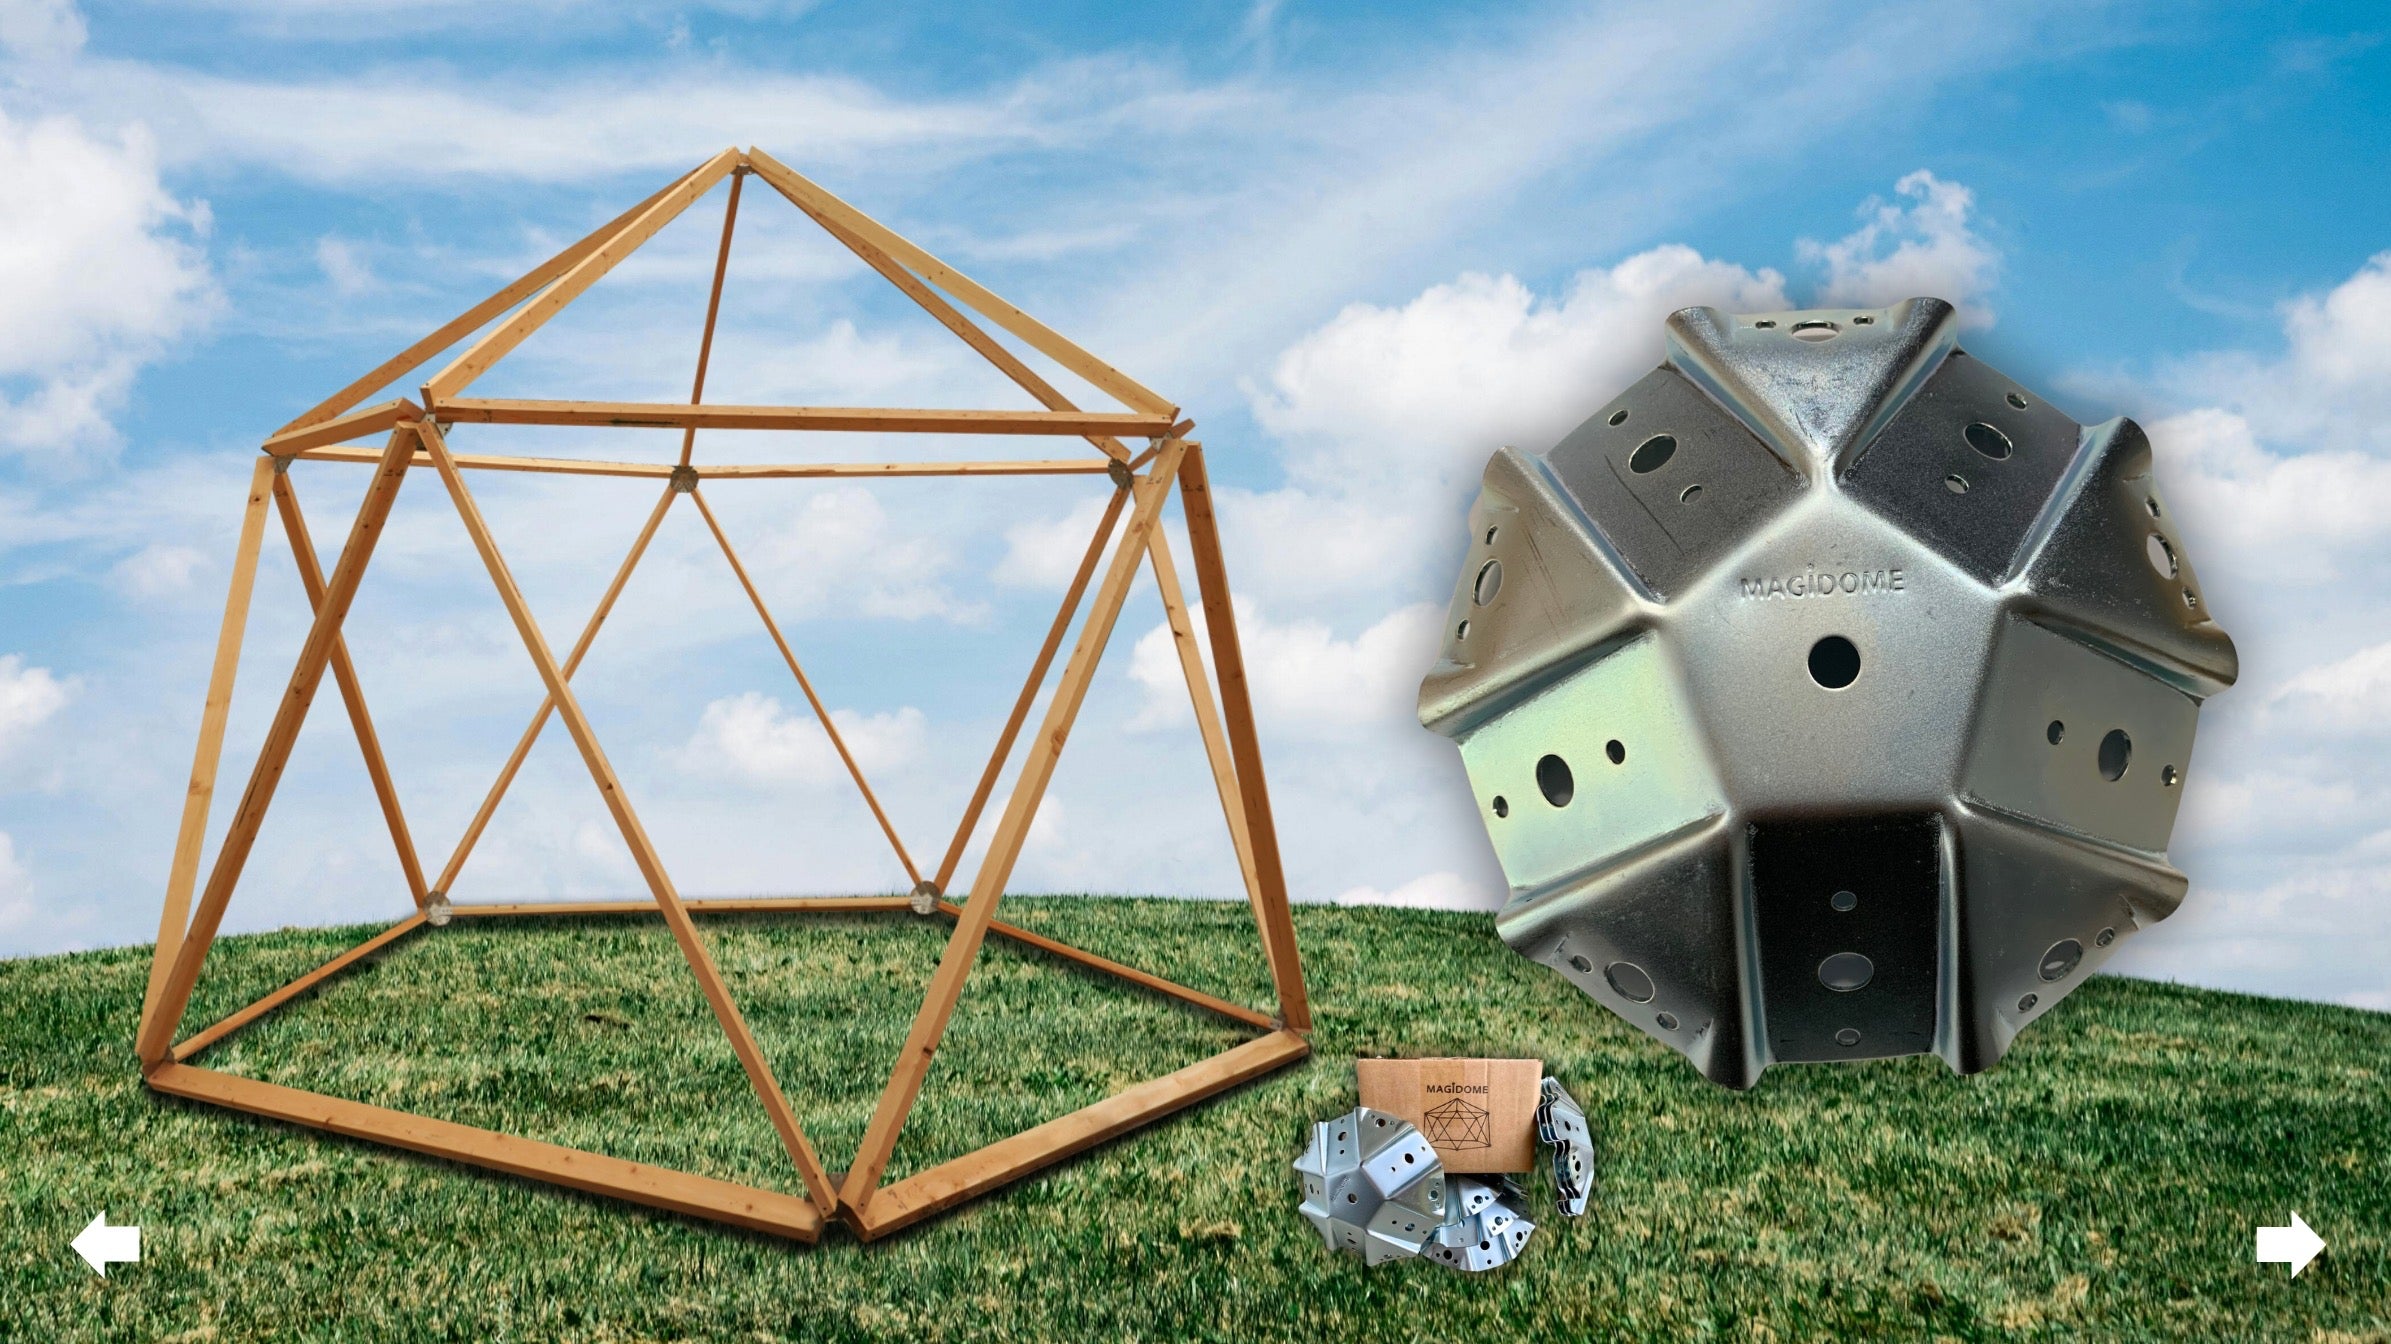 Magidome® Steel Geodesic Dome Connectors